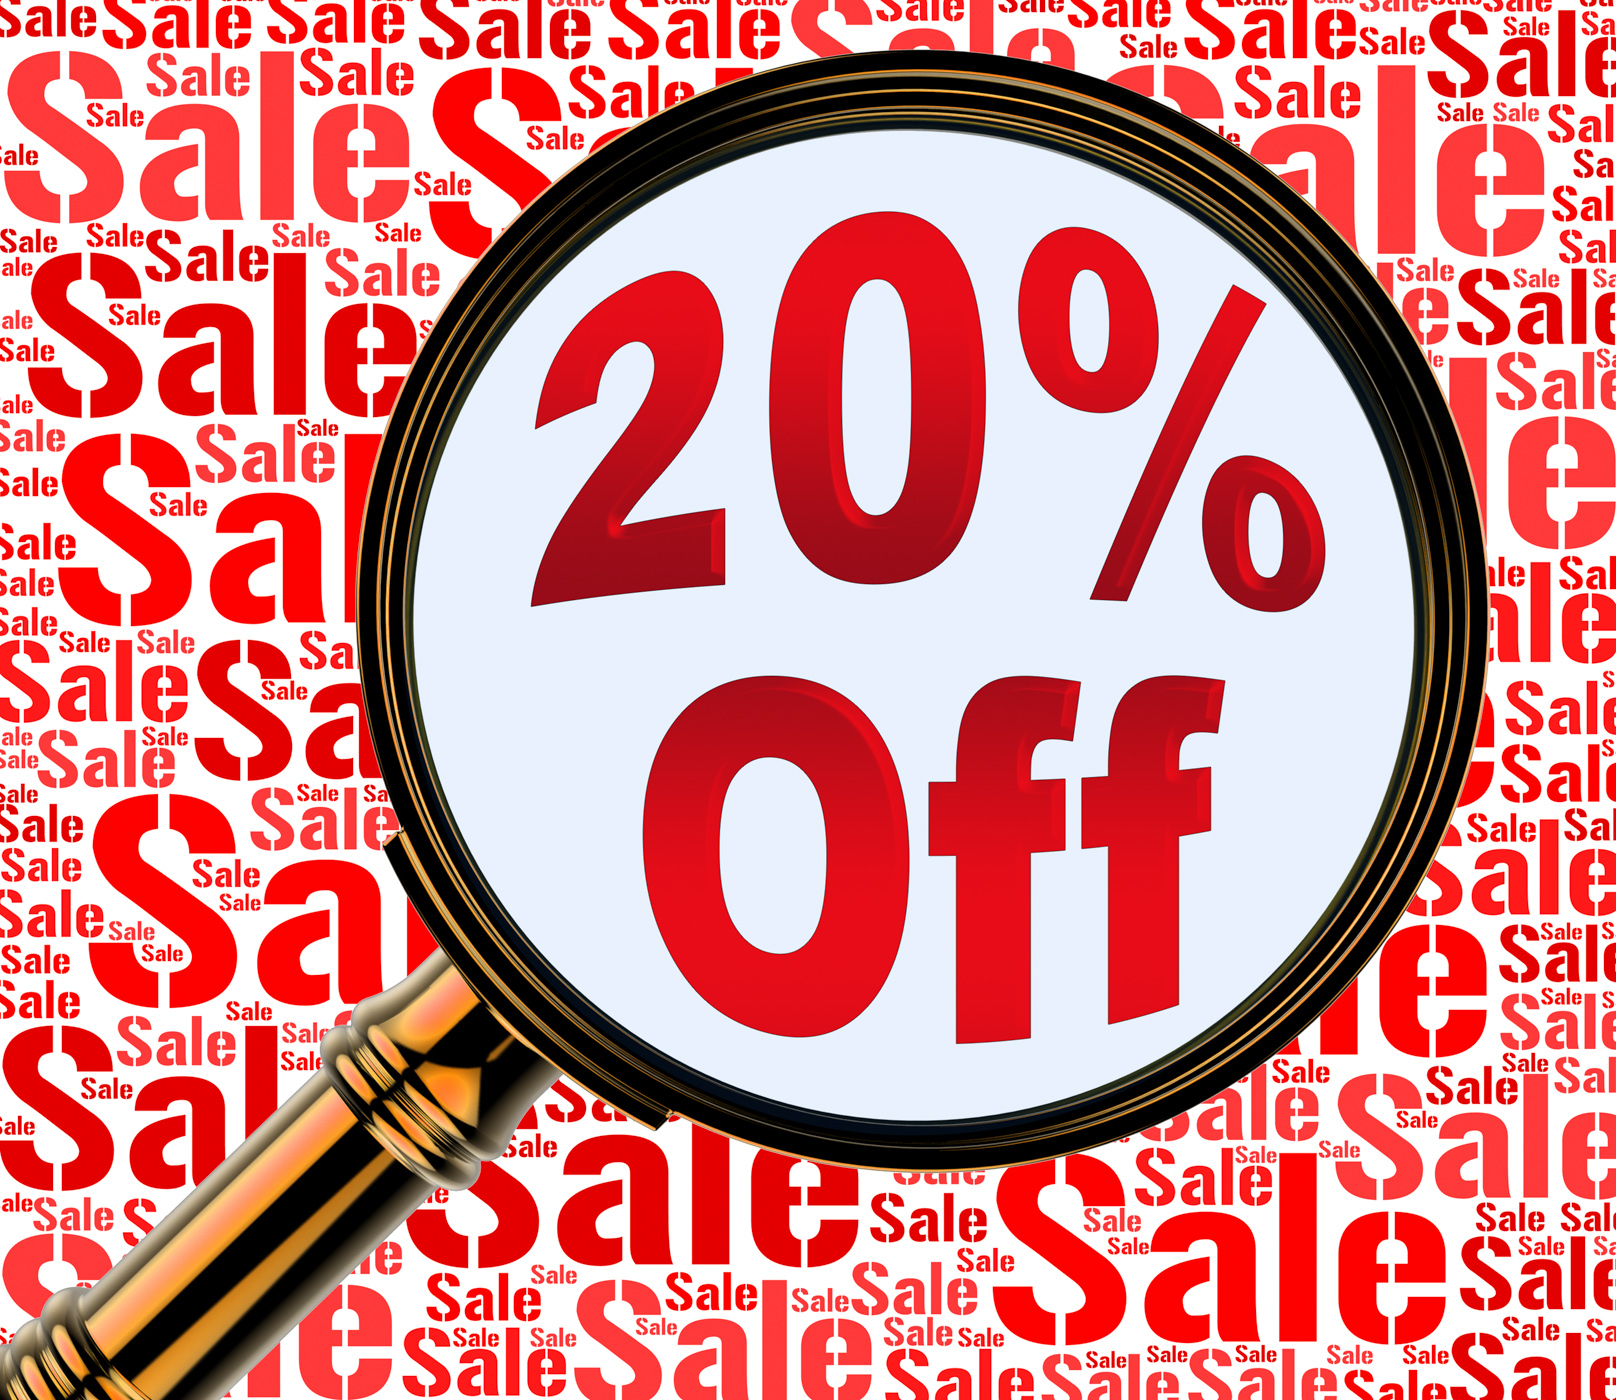 Twenty percent off means discount closeout and offers photo